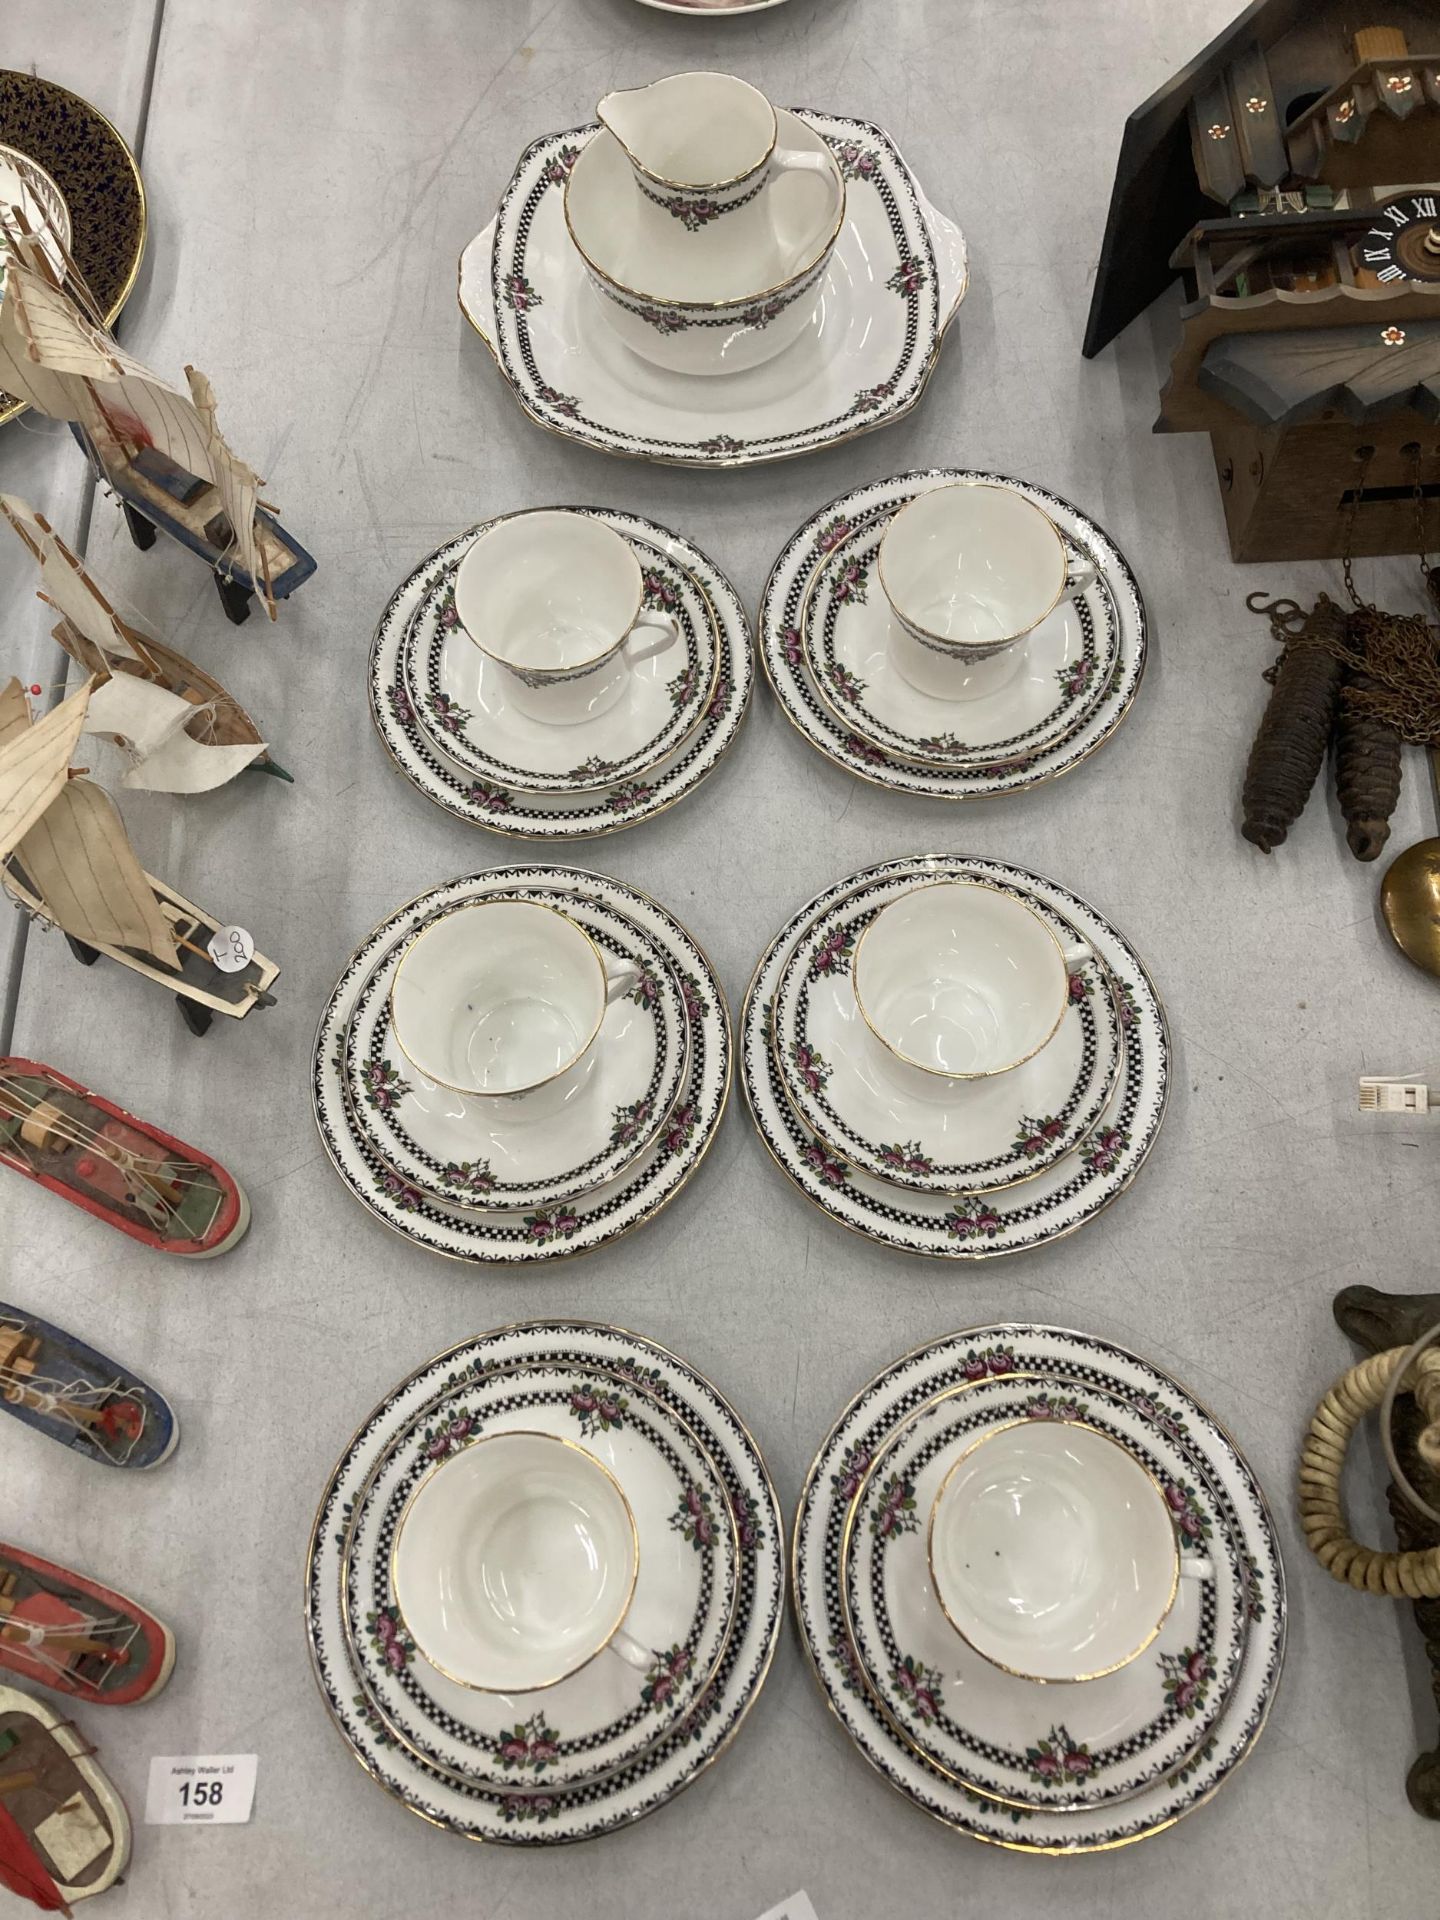 A VICTORIAN CHINA TEASET TO INCLUDE CAKE PLATE, SUGAR BOWL, CREAM JUG, CUPS, SAUCERS AND SIDE PLATES